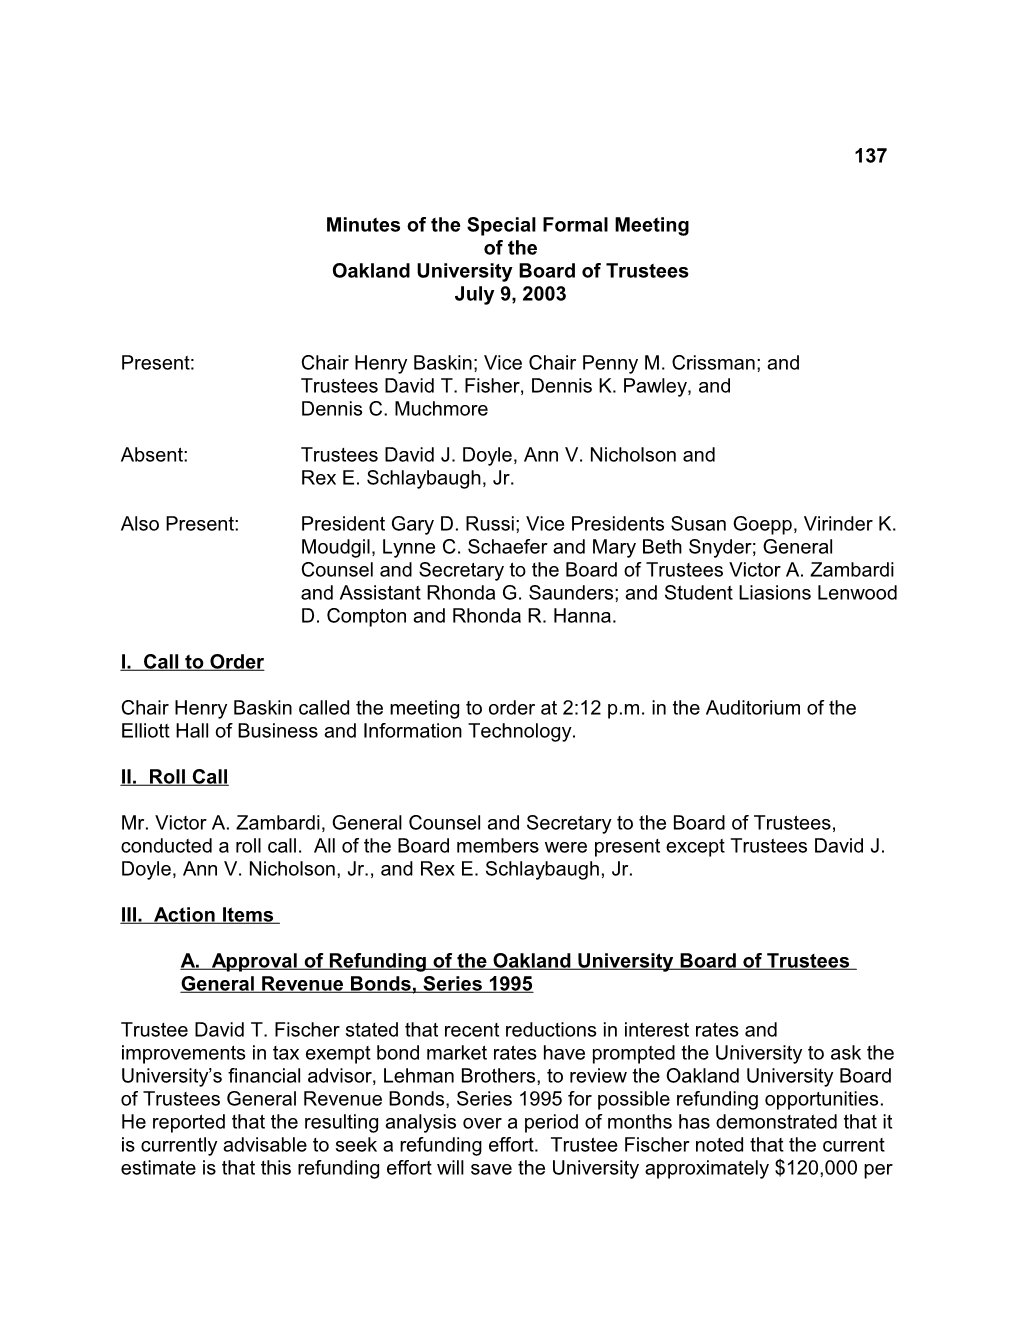 Minutes of the Special Formal Meeting